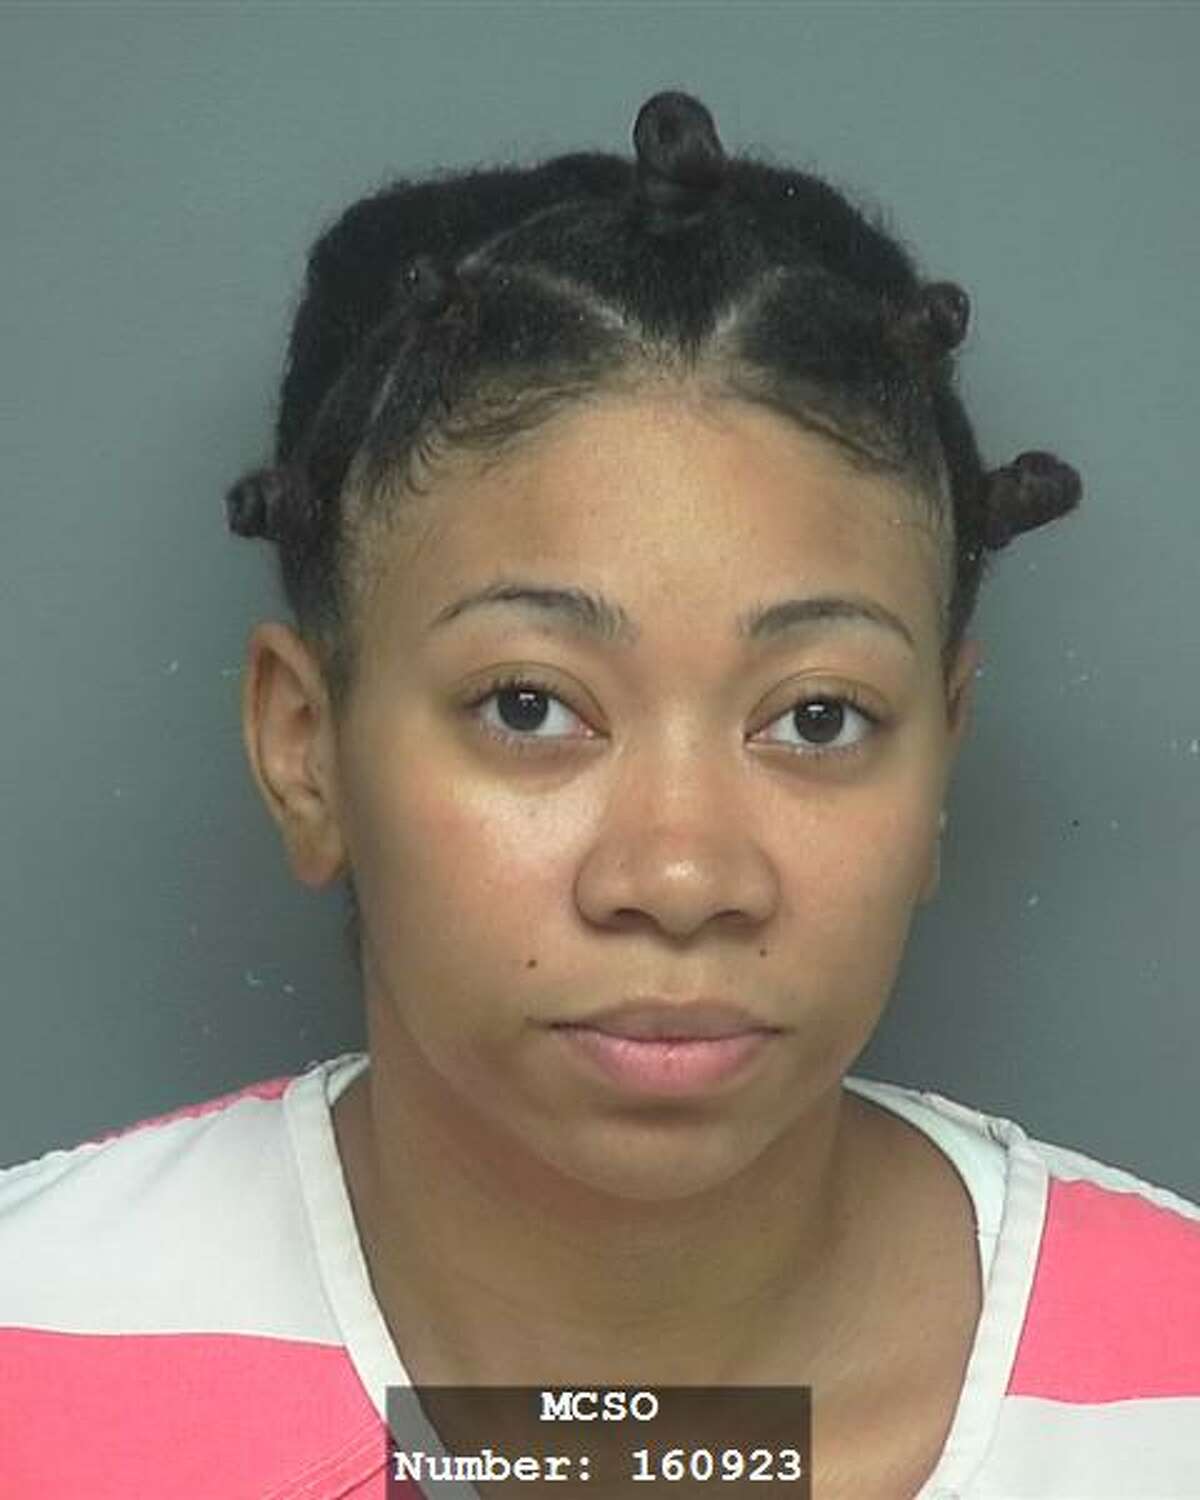 Keyonna Gunner, 22, was arrested and charged with felony injury to a child on Tuesday after police said she shocked a special needs child with a stun gun. See the most dangerous cities in Texas, according to FBI data.